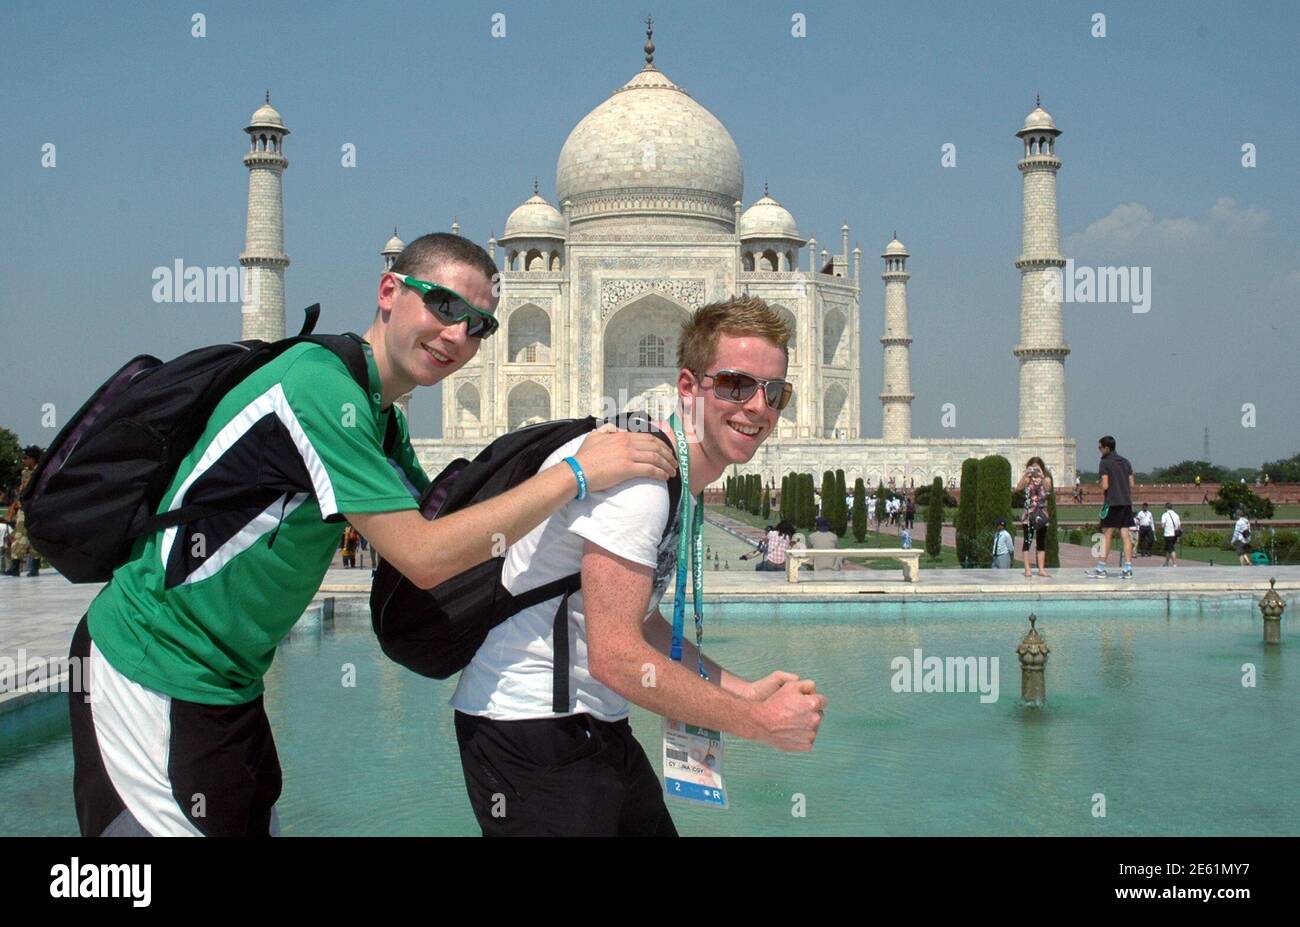 Northern Ireland's cyclists Sean Downey (L) and Philip Lavery pose for  pictures in front of historic Taj Mahal in the northern Indian city of Agra  October 12, 2010. Downey and Lavery are